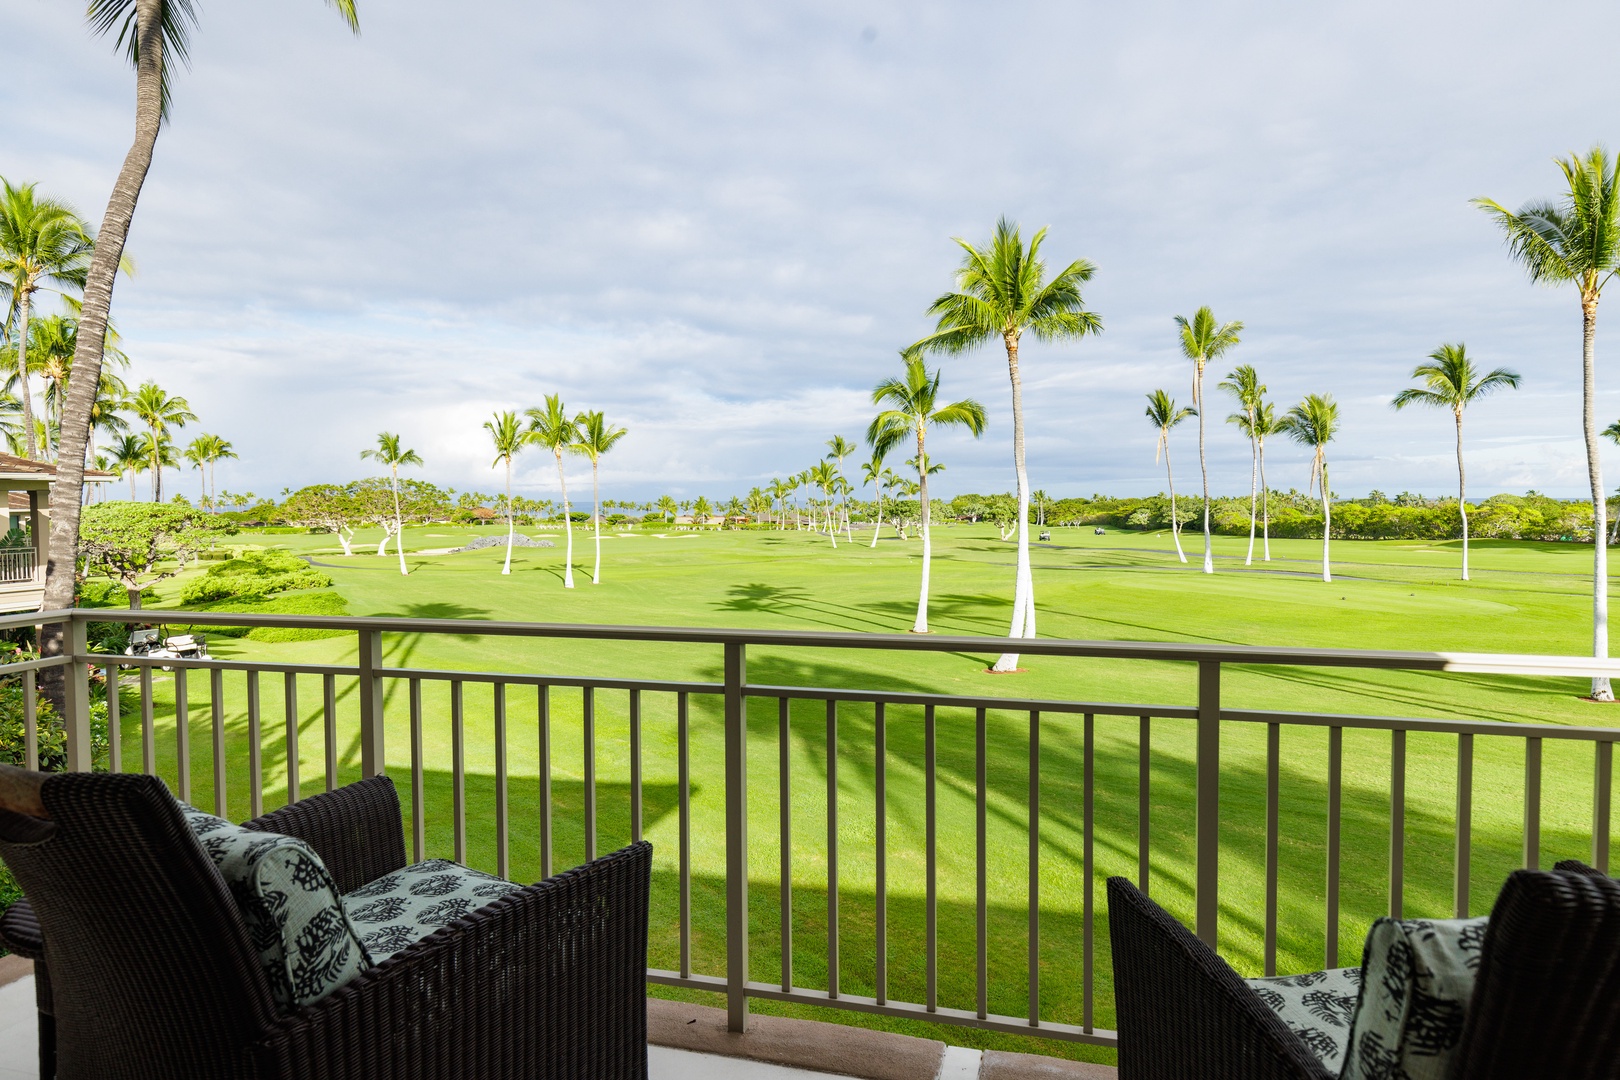 Kailua Kona Vacation Rentals, Fairway Villa 104A - A very nice morning view from your private lanai.